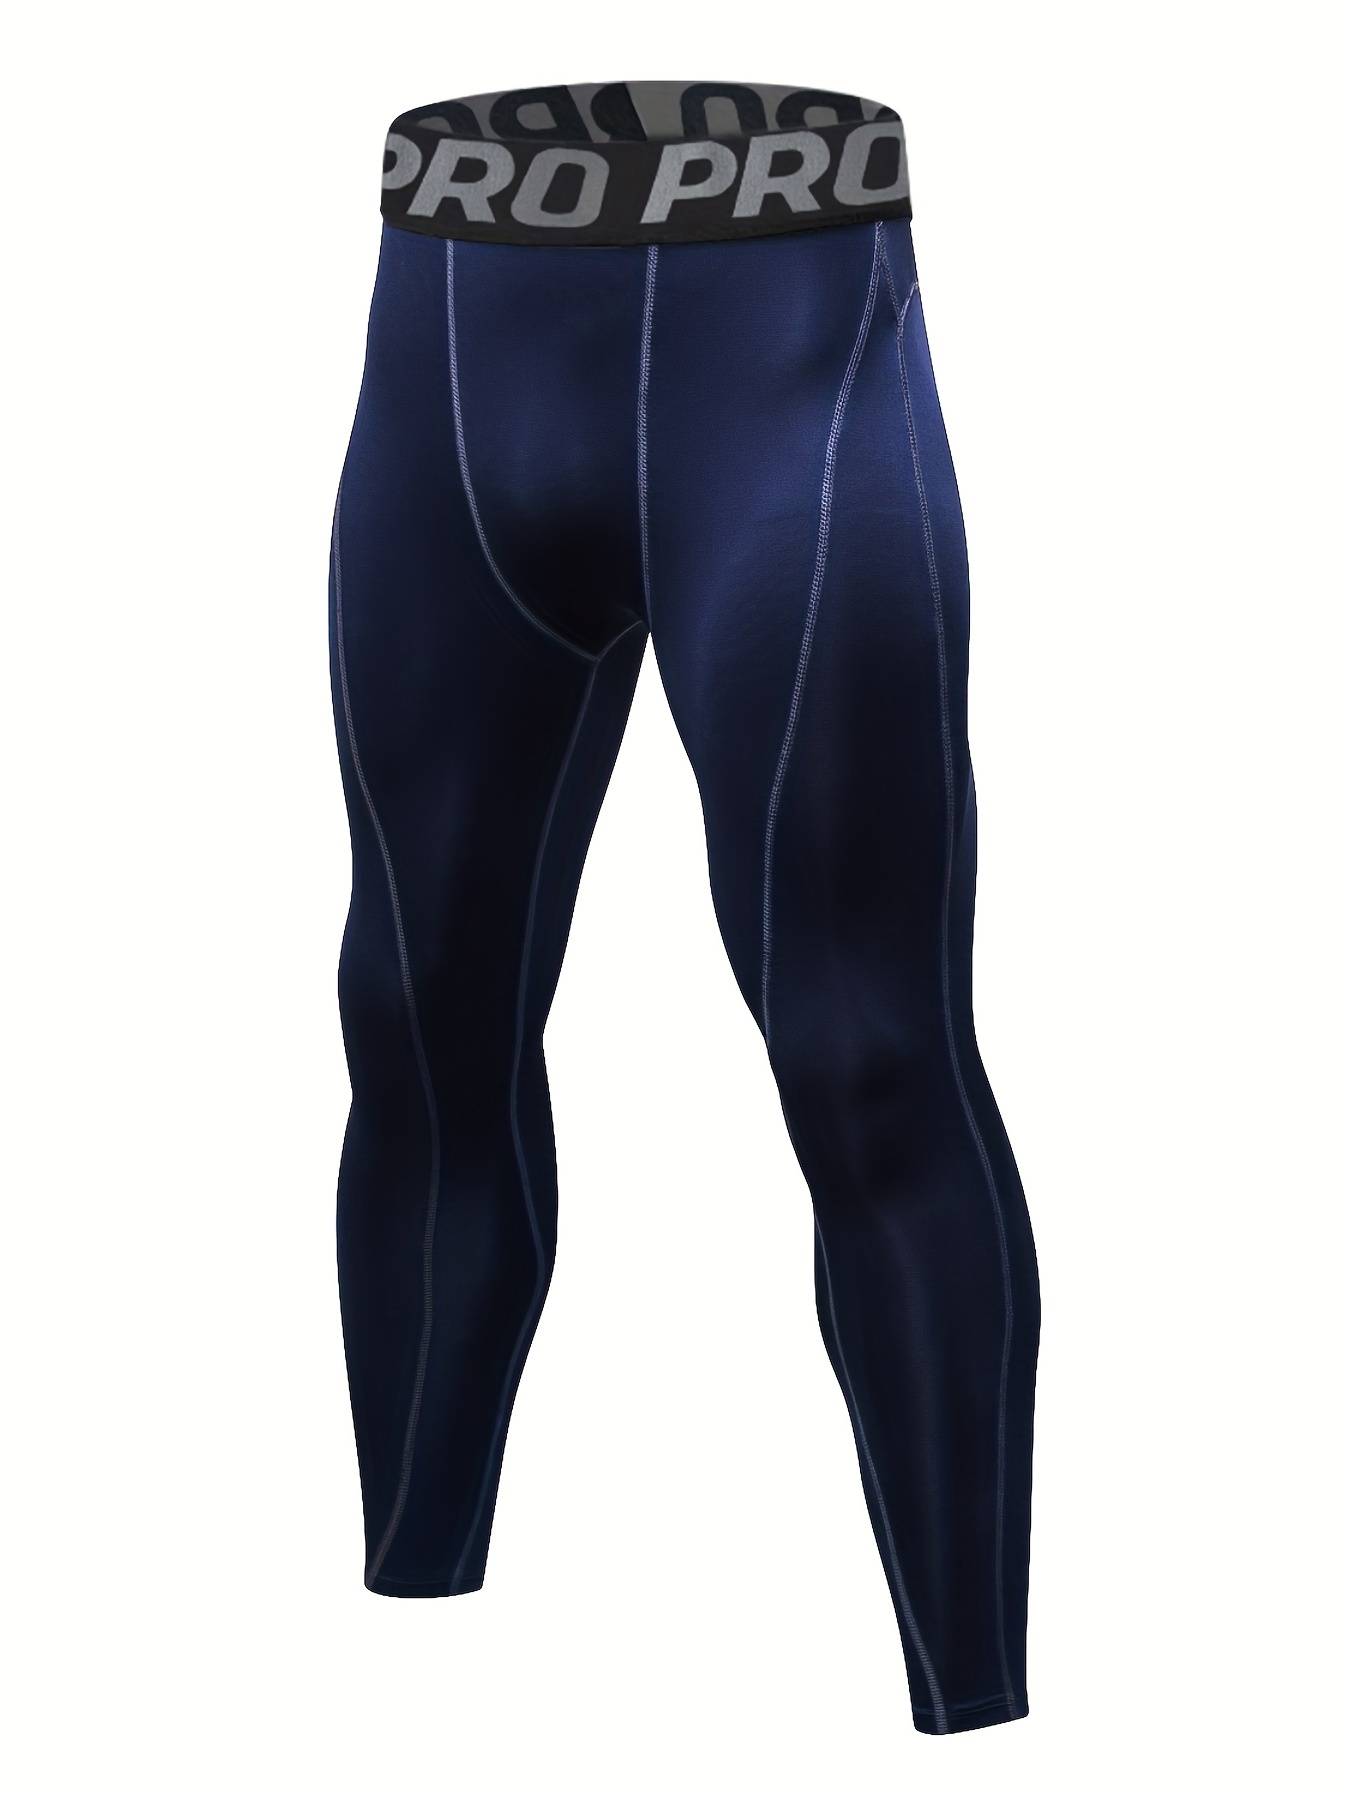  Mens Thermal Compression Pants Athletic Warm Leggings  Pockets Baselayer Running Tights Winter Underwear Bottoms